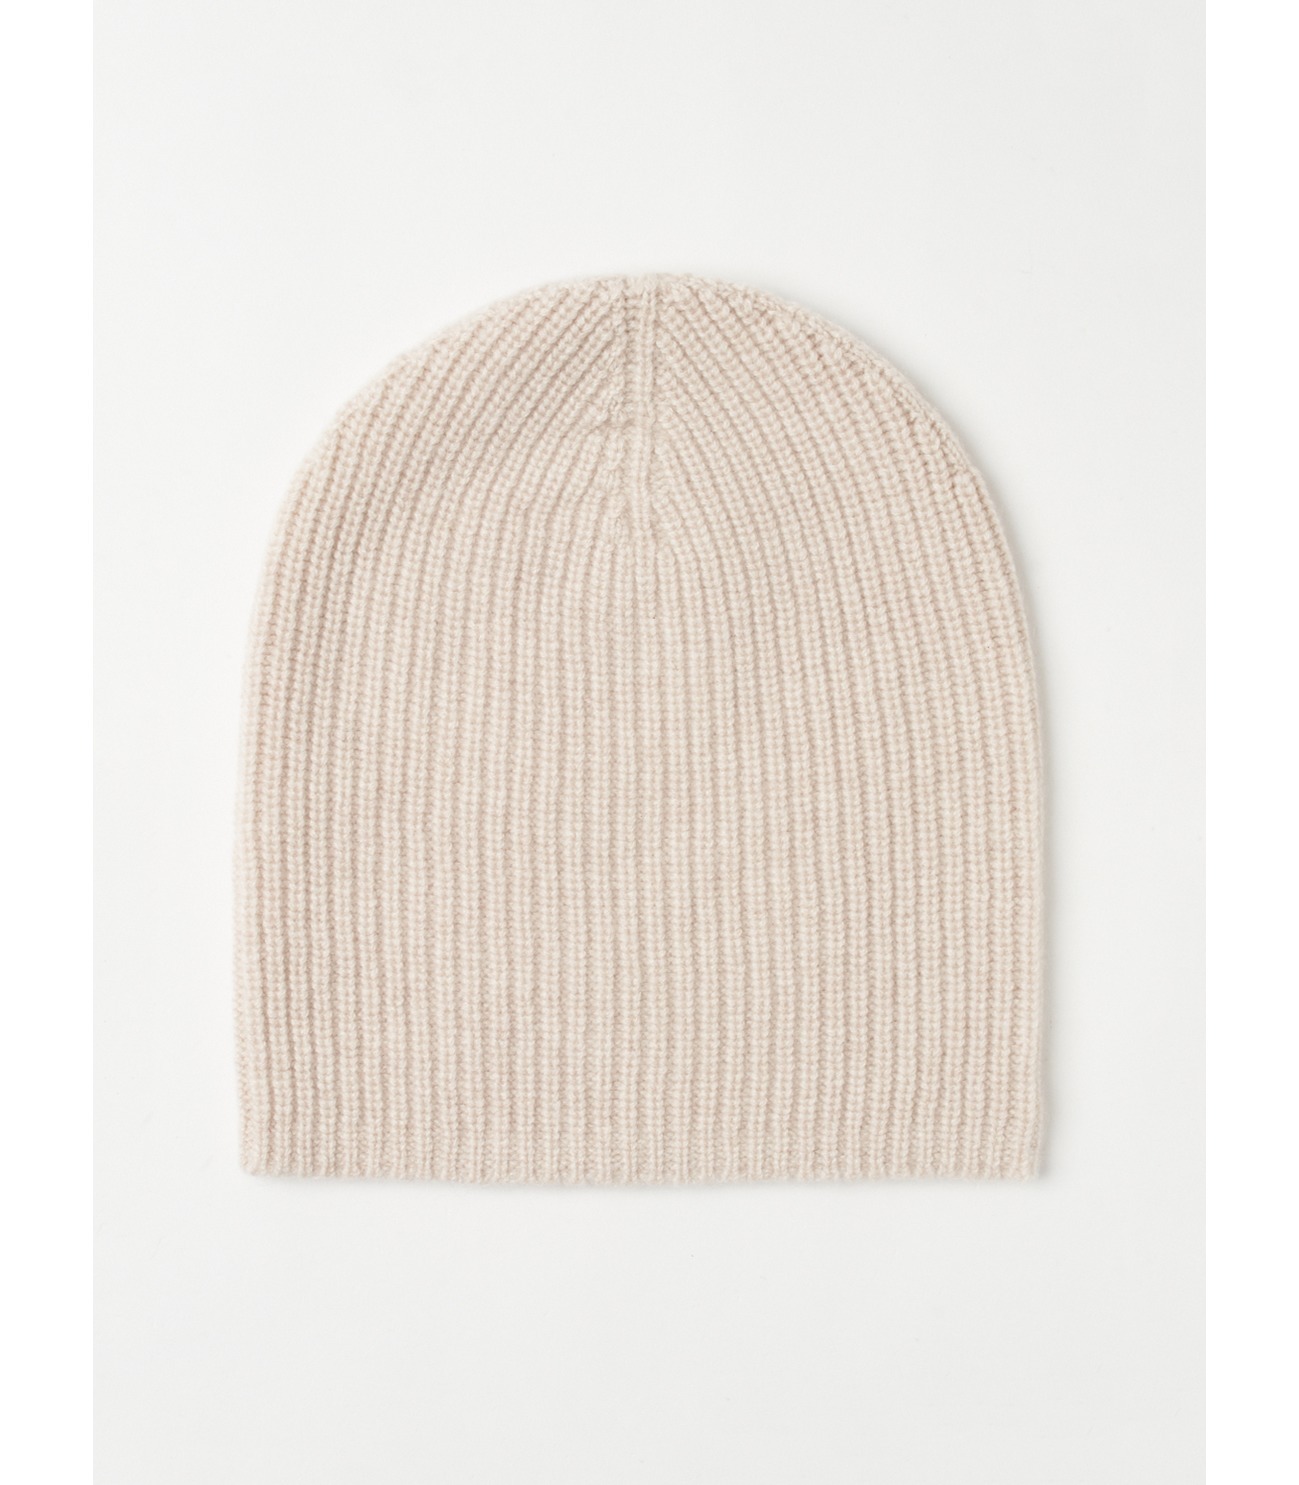 Holiday cashmere cap 詳細画像 oatmeal 1